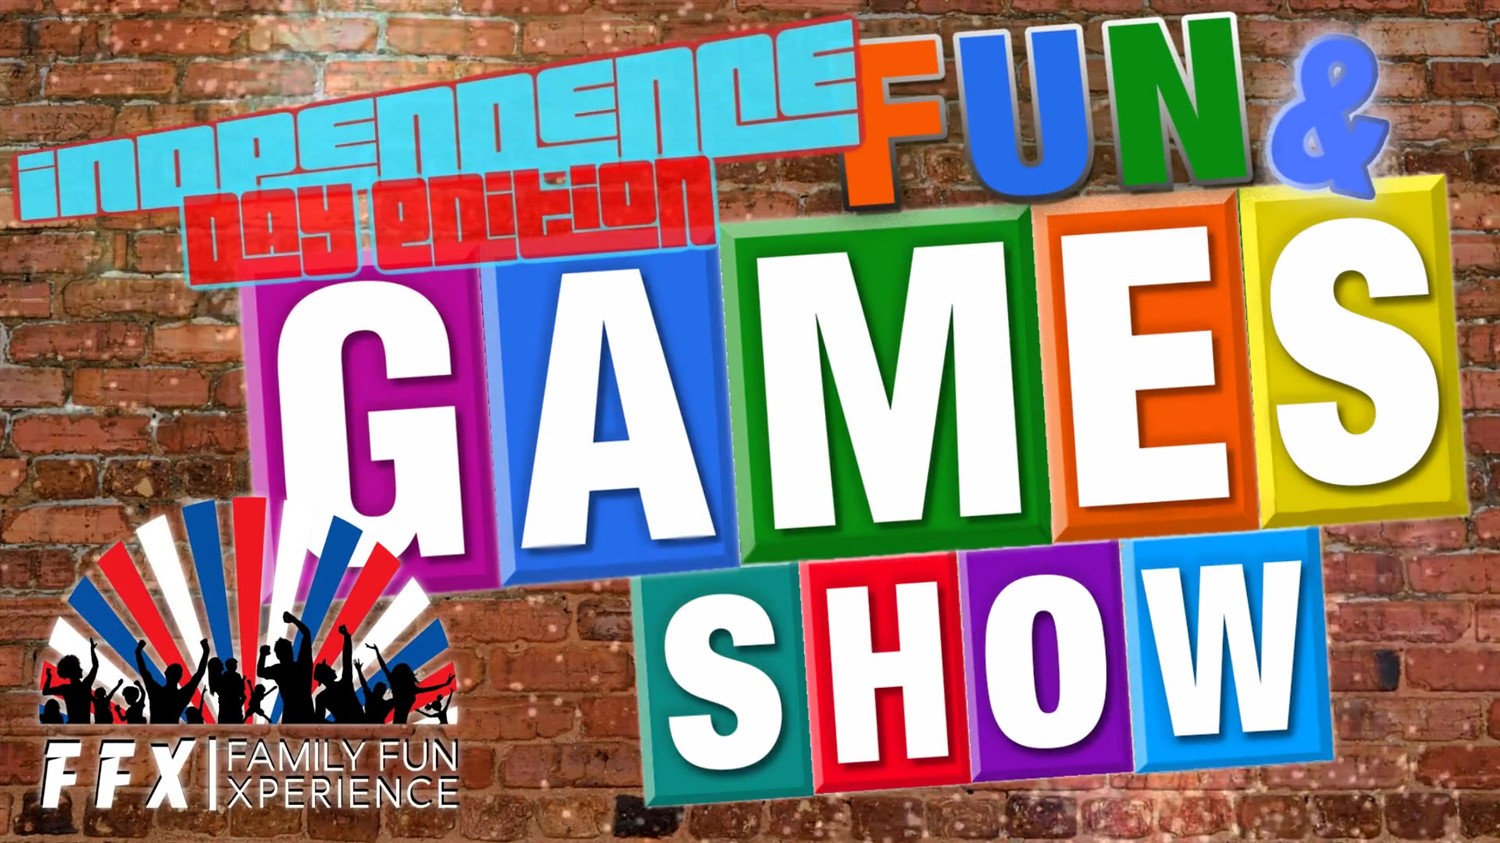 INDEPENDENCE DAY Fun & Games Show! July 4th Weekend Special Edition on Jul 03, 19:00@FFX Theatre - Pick a seat, Buy tickets and Get information on Family Fun Xperience tickets.ffxshow.org